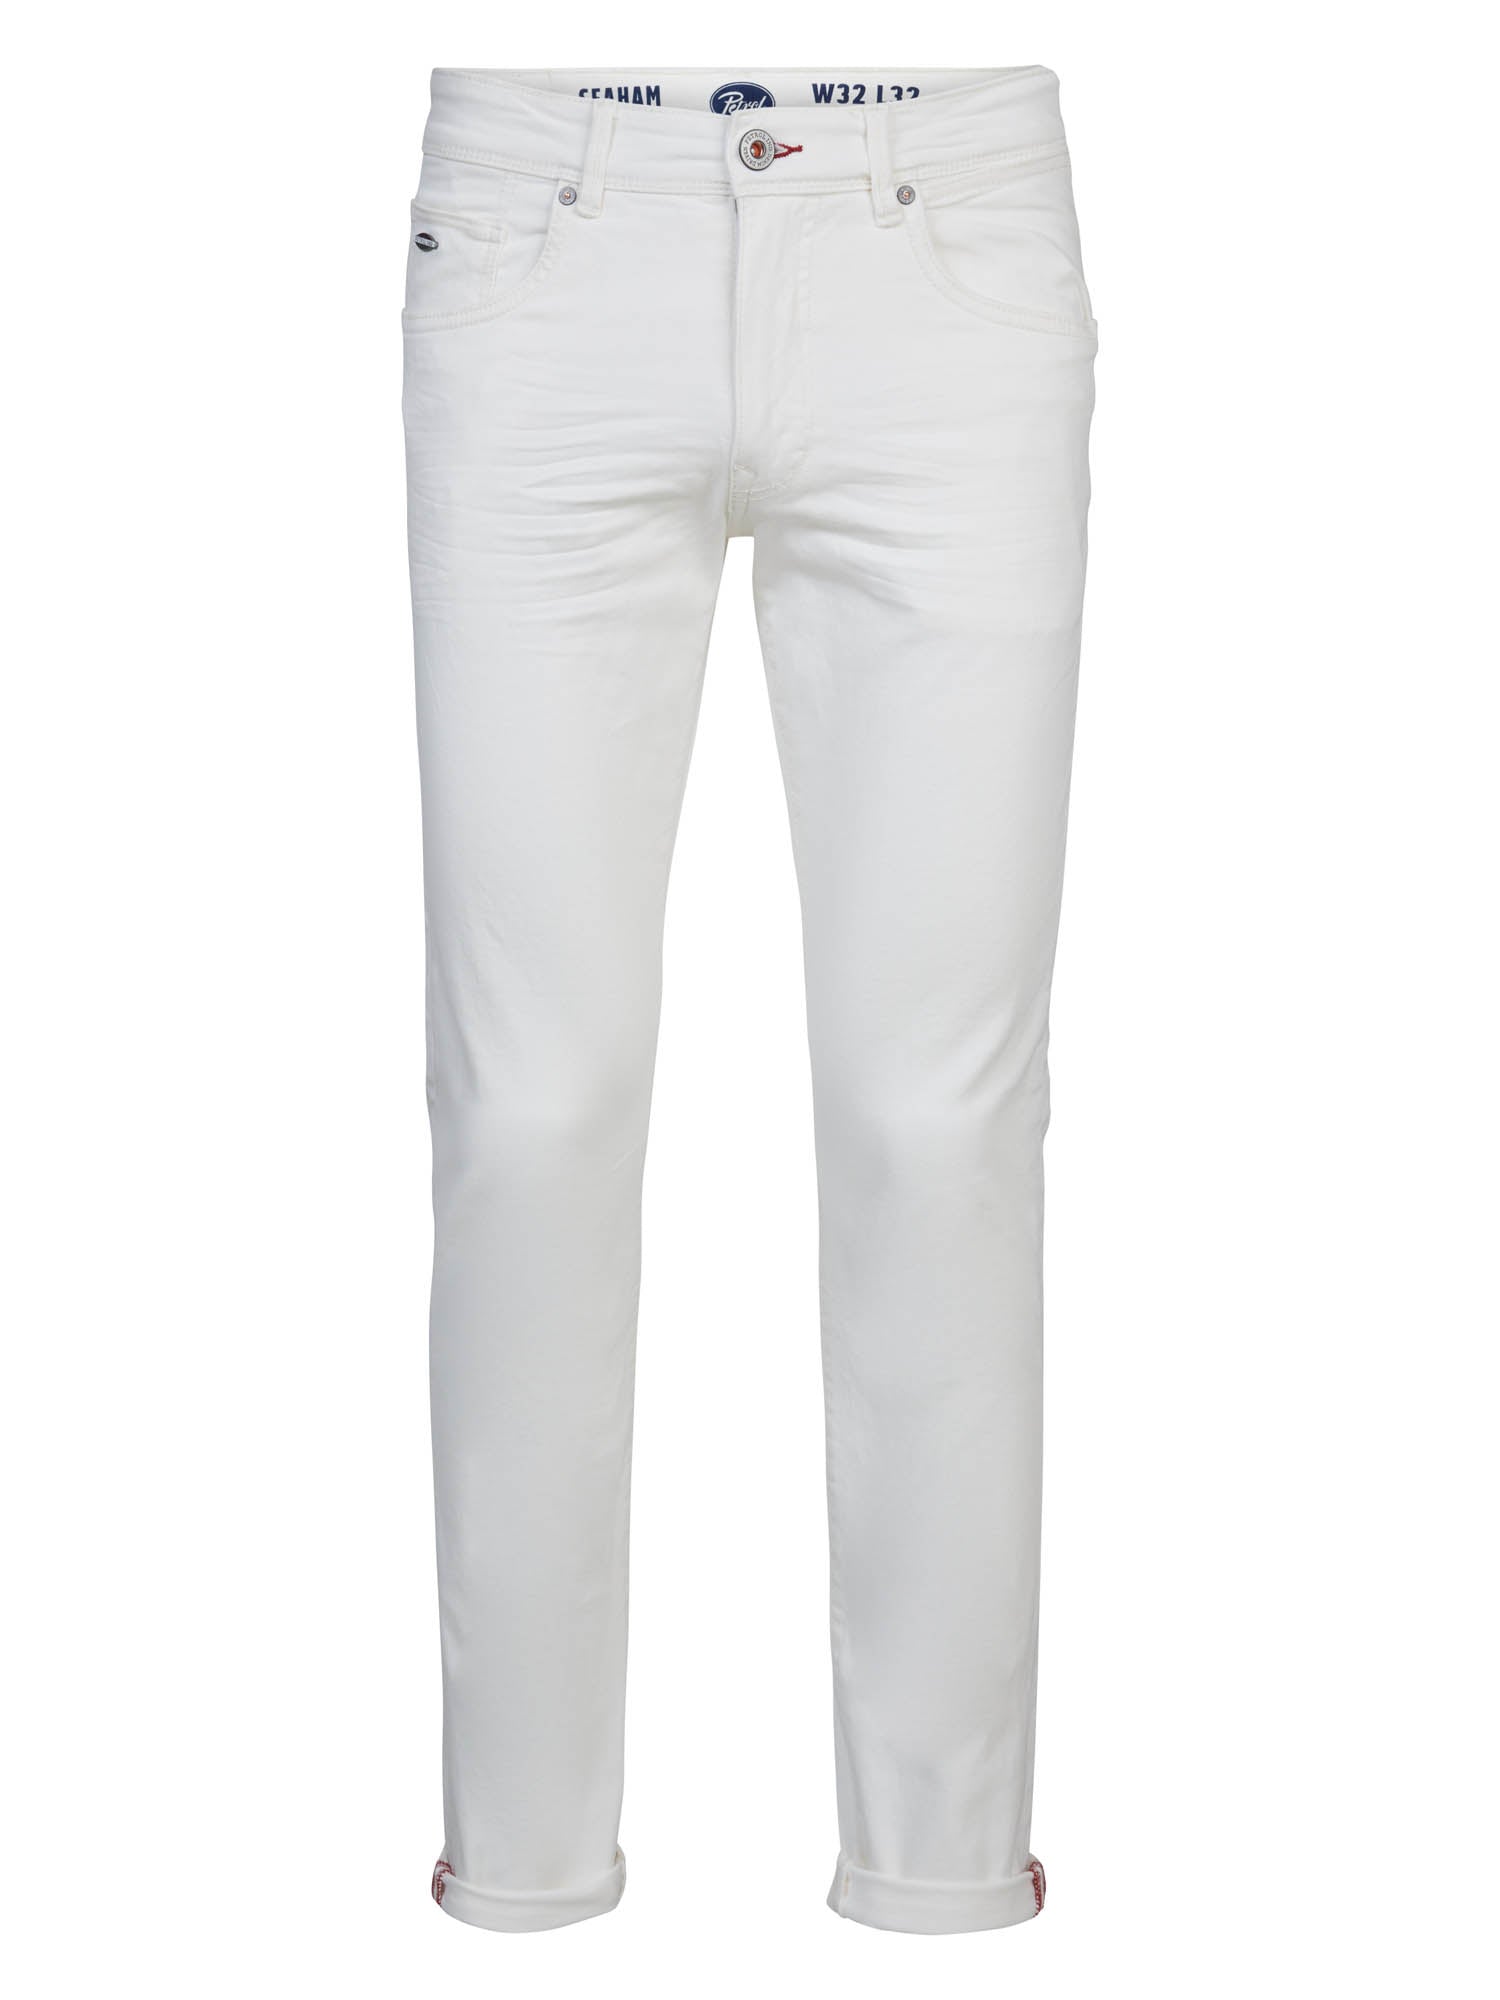 Petrol Industries Seaham Coloured, Slim-fit Jeans Bright White - 30